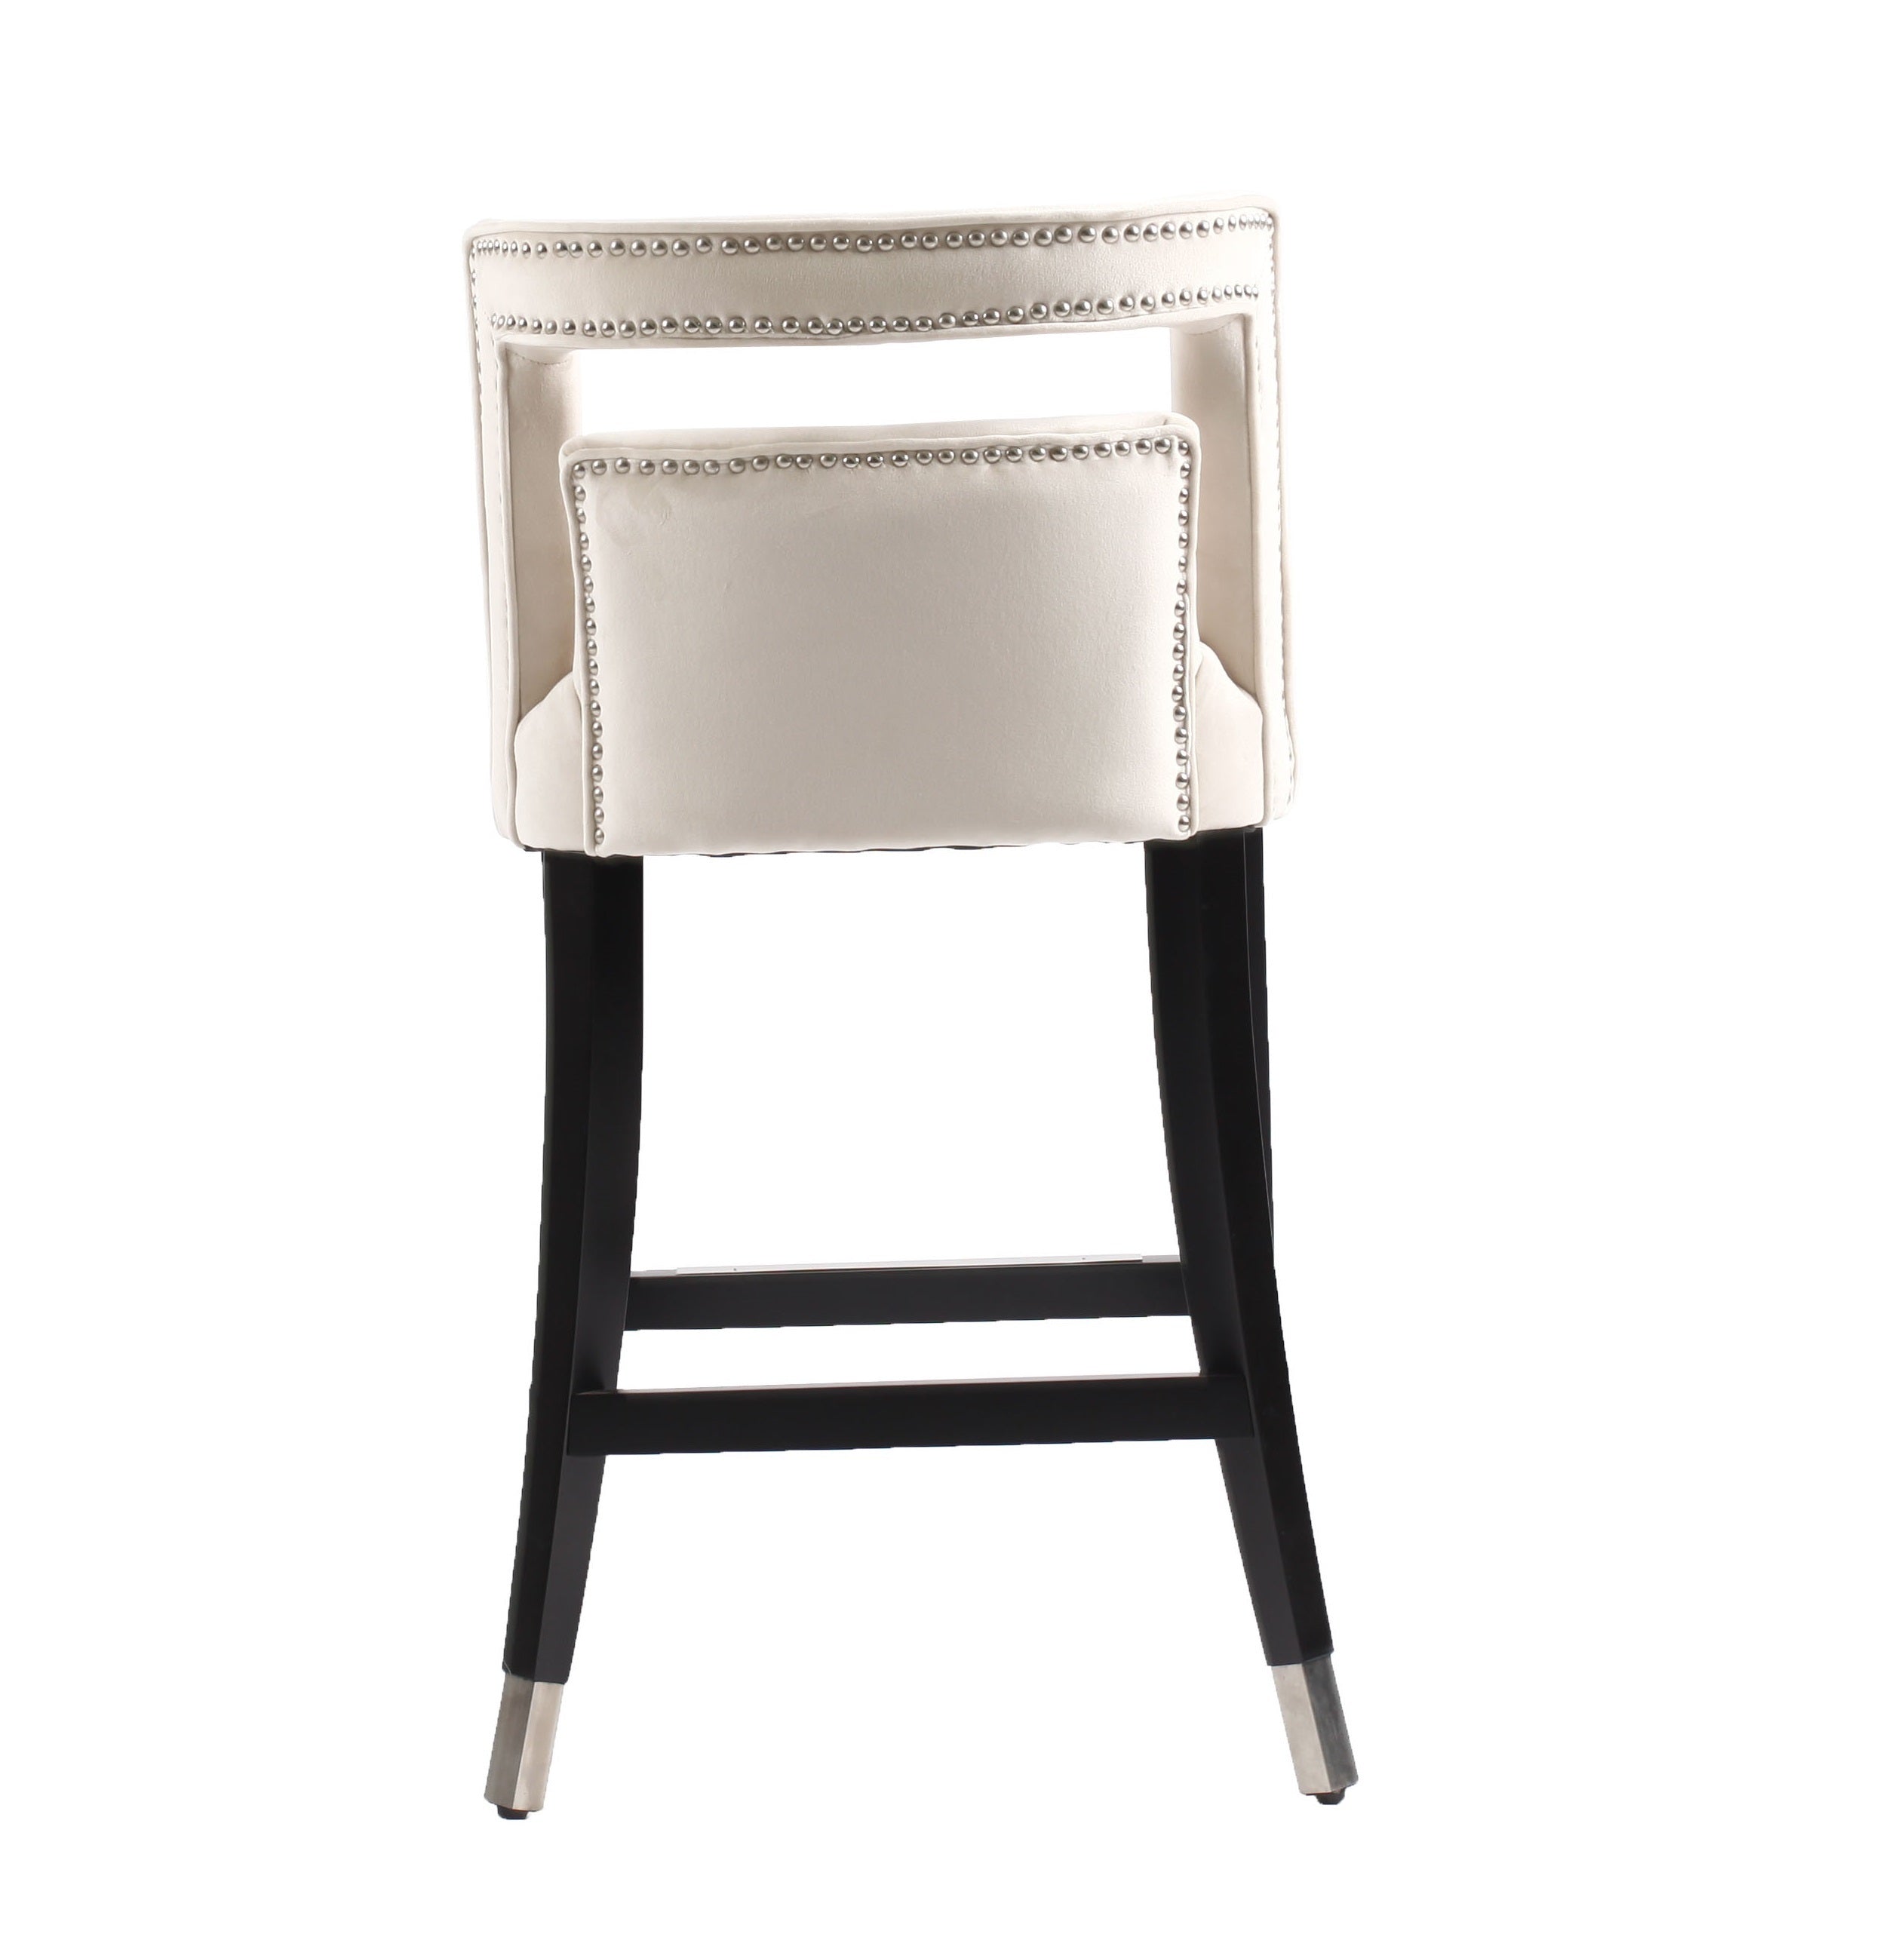 Suede Velvet Barstool with nailheads Dining Room Chair 2 pcs Set - 26 inch Seater height - Cream